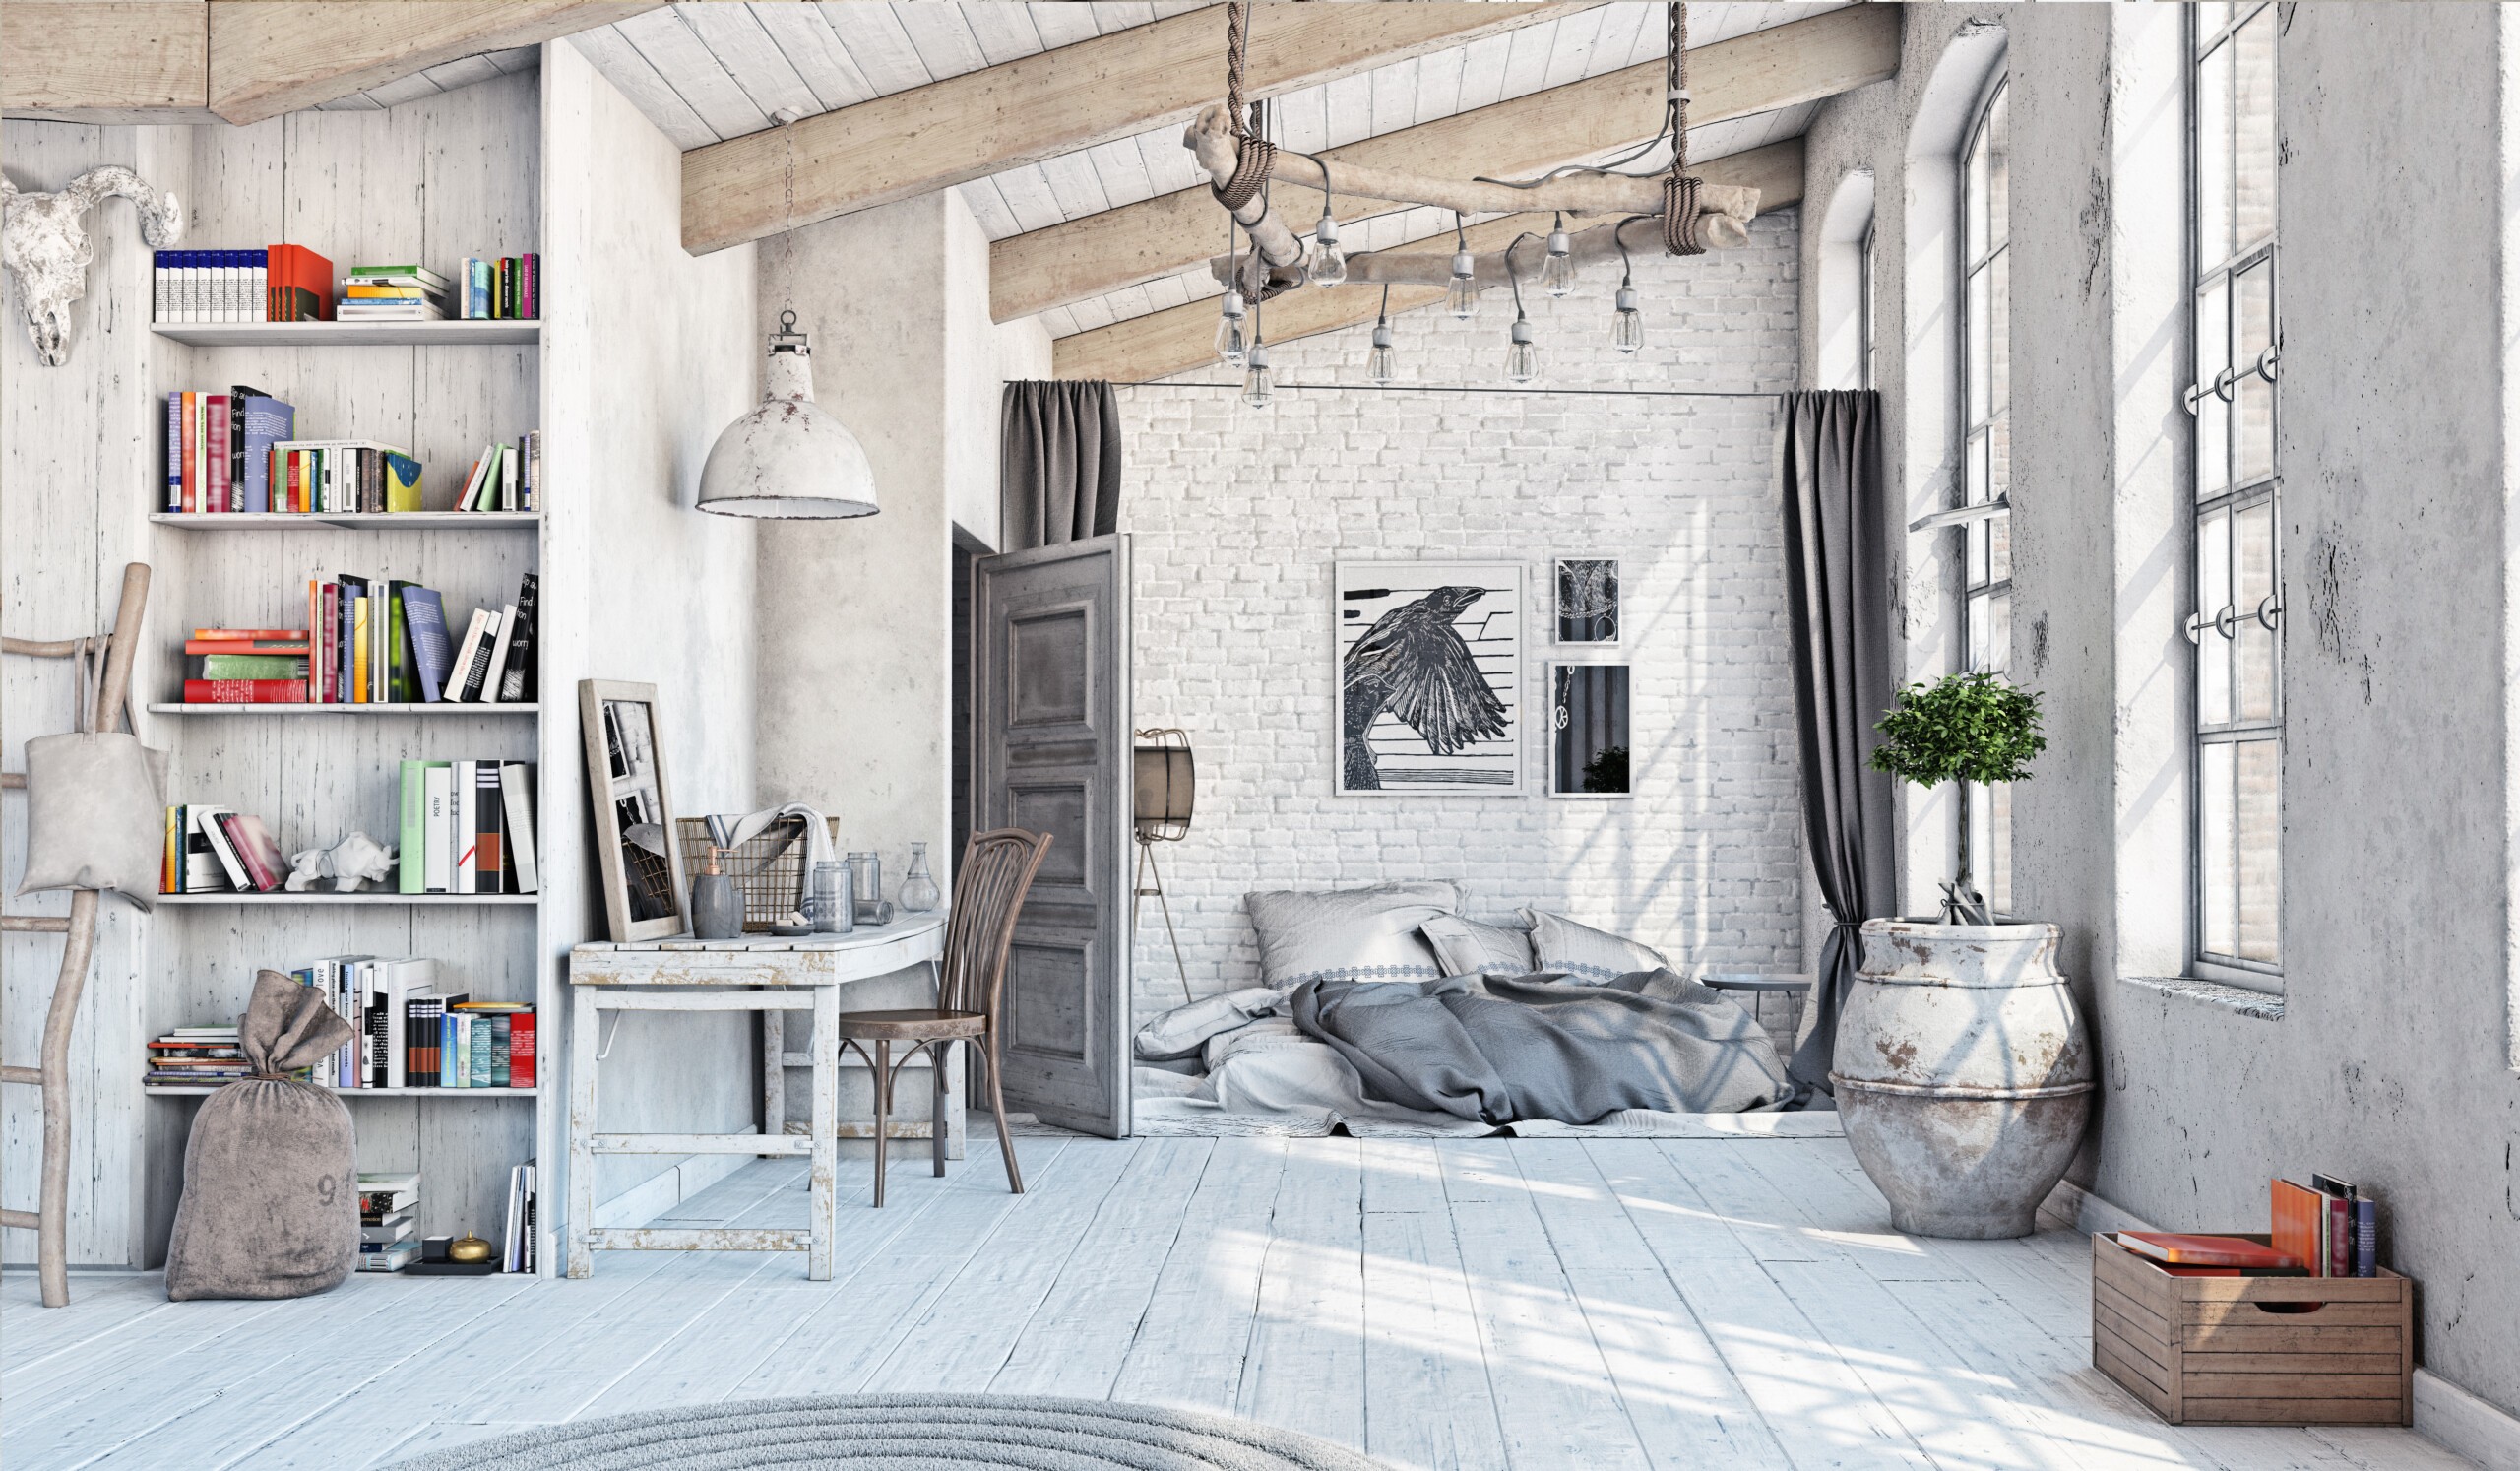 How to Design Your Home in the Shabby Chic Style – Wilson & Dorset